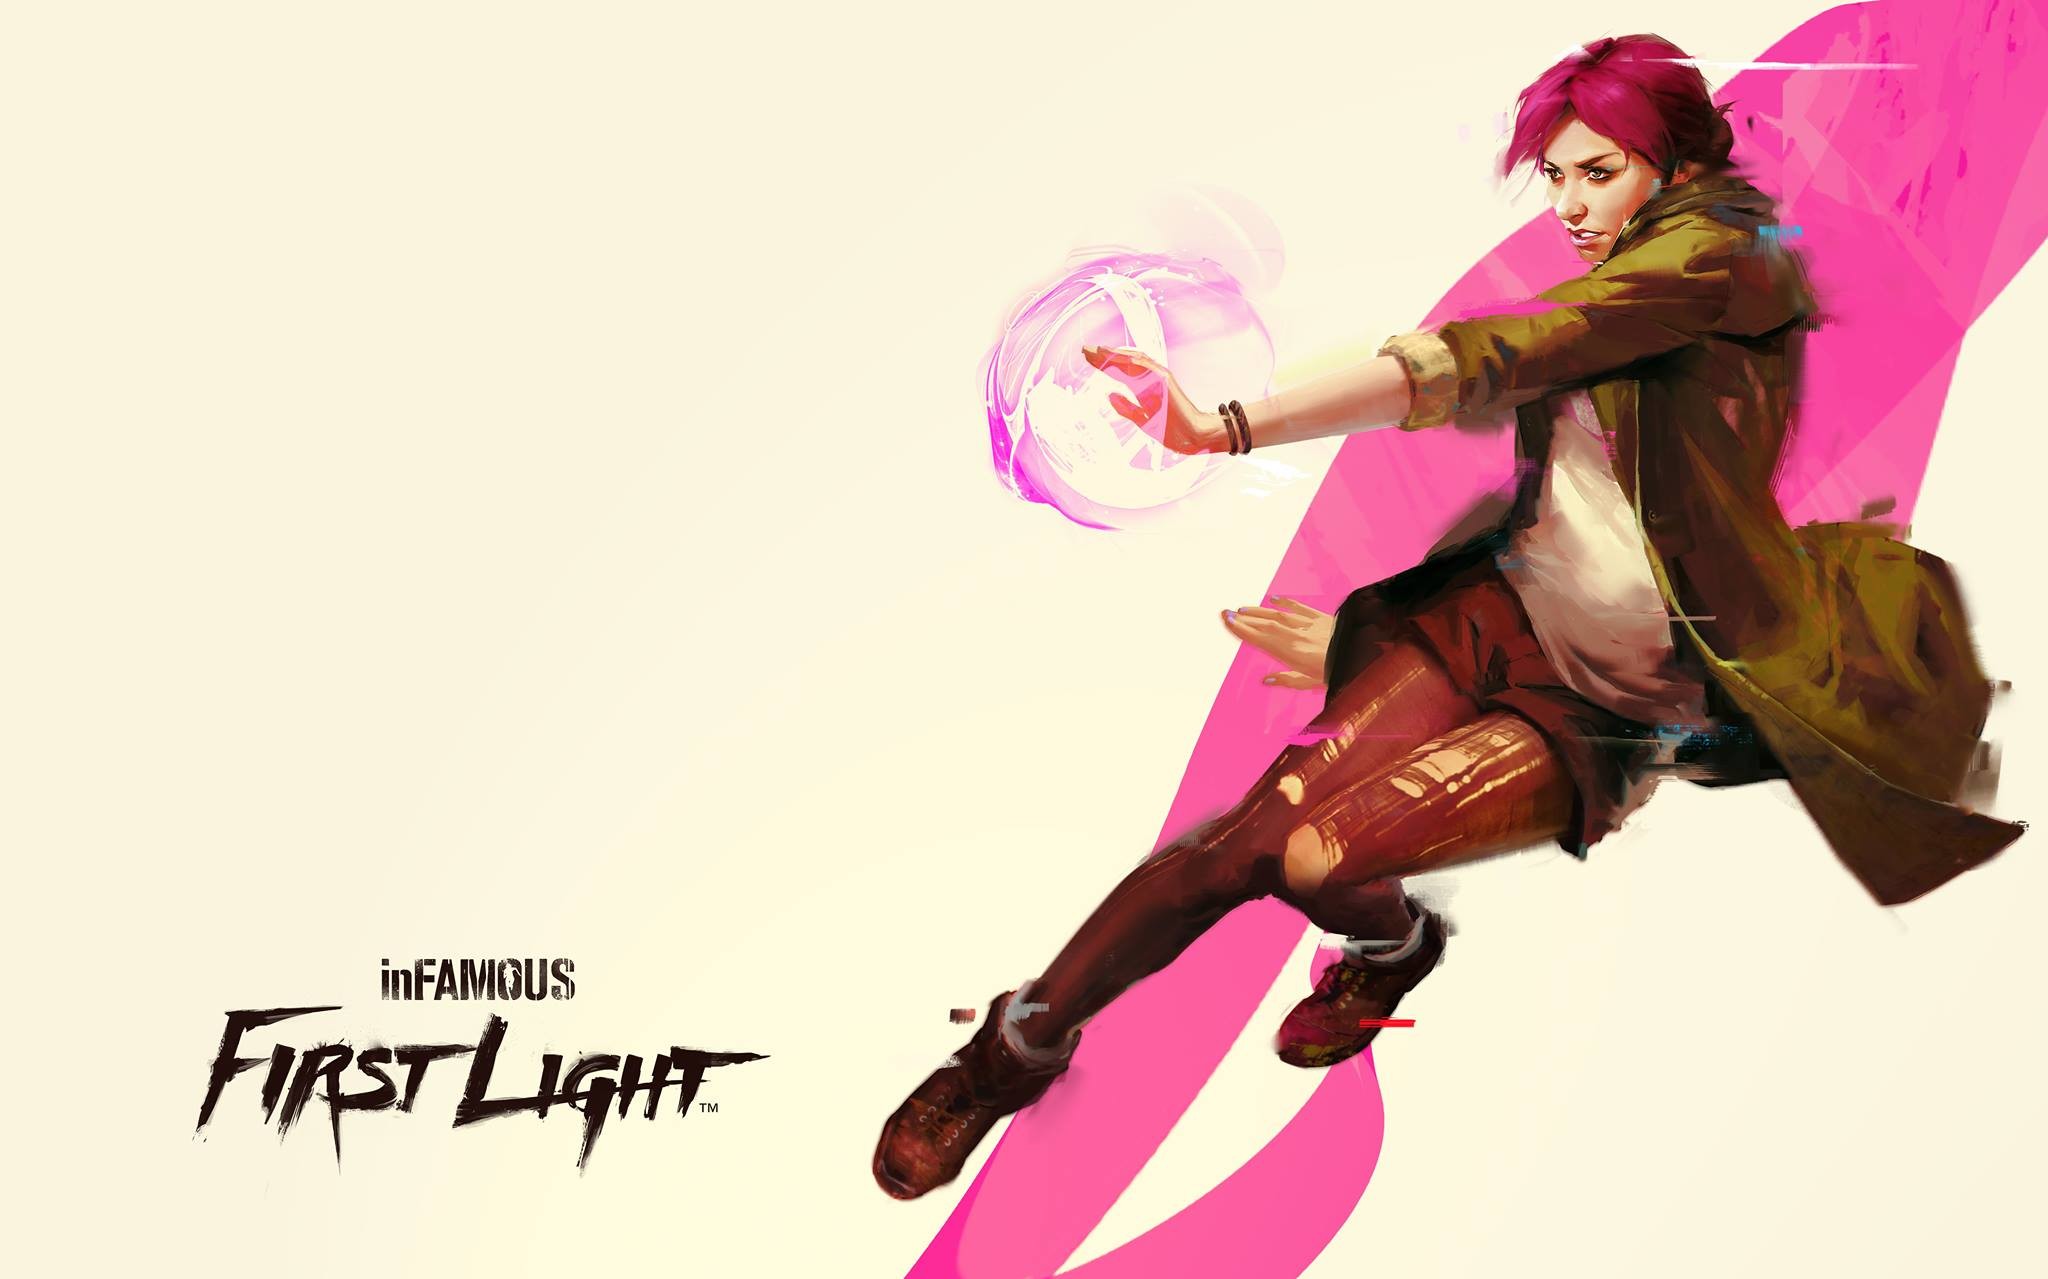 2048x1279 inFAMOUS: Second Son's Fetch Gets New Concept Art Dedicated To First Light  DLC